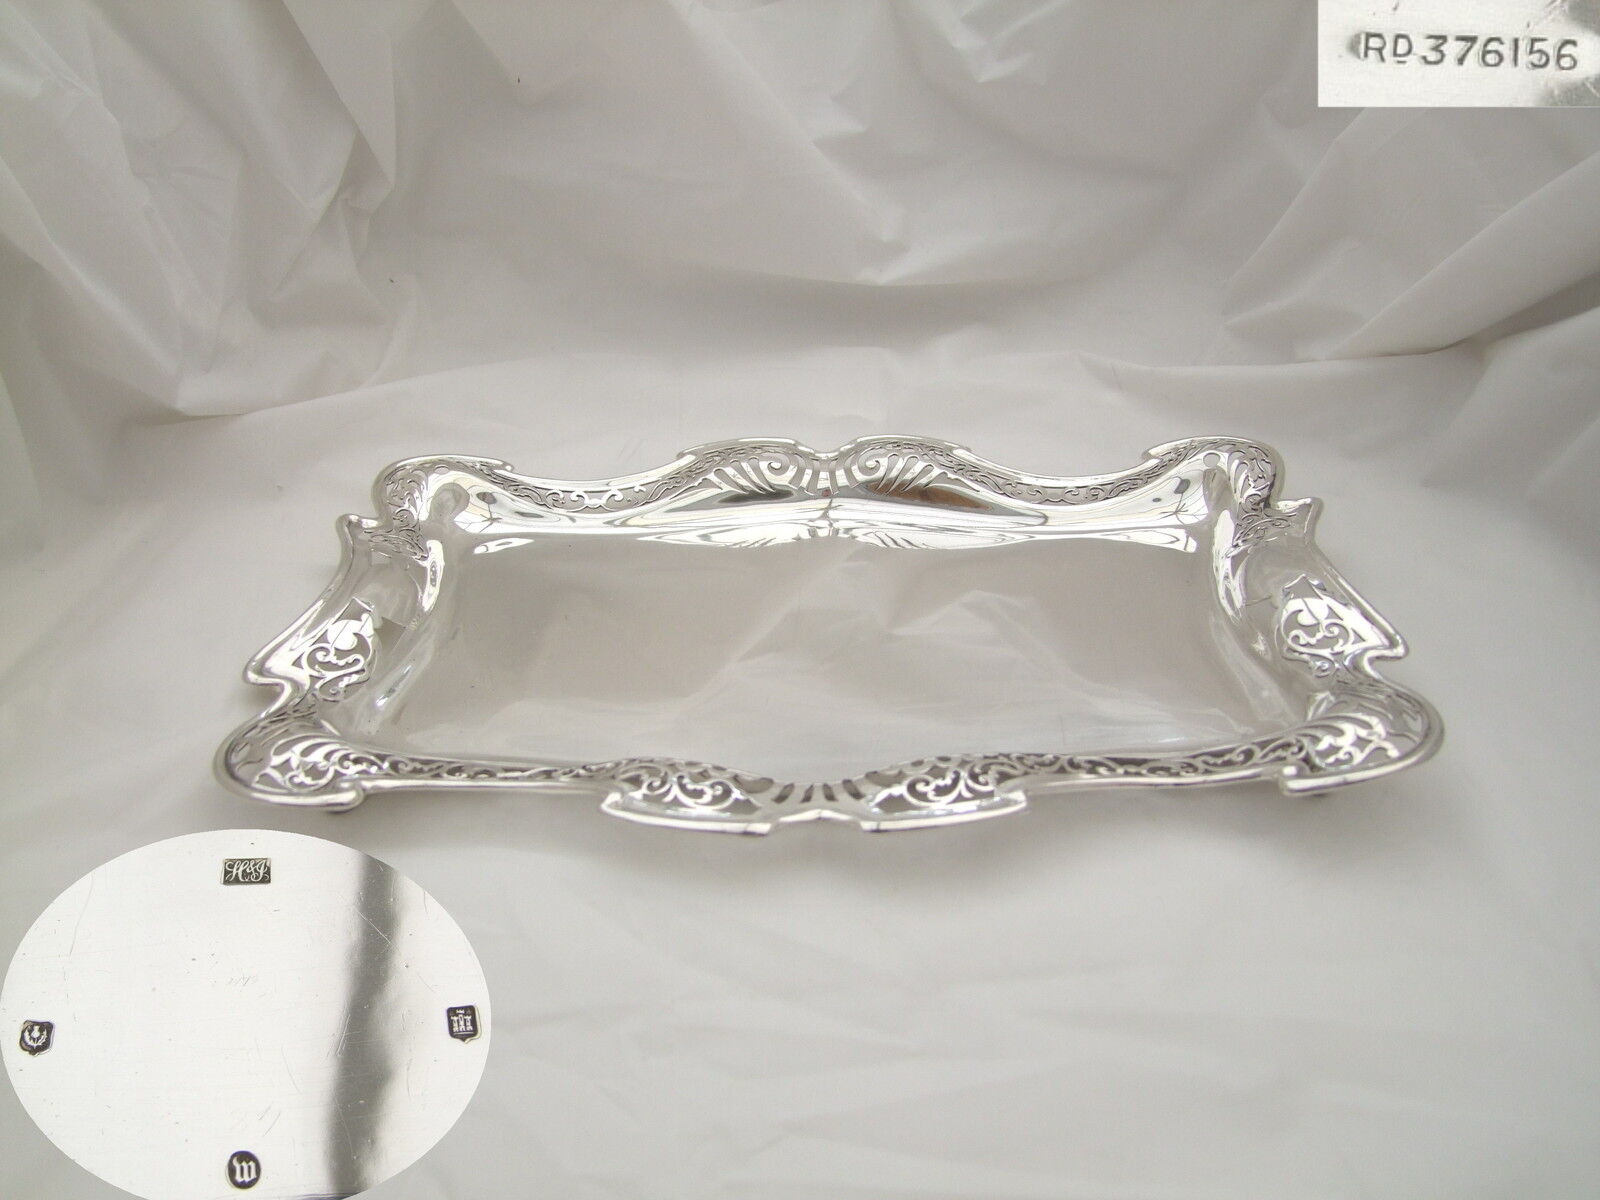 RARE EDWARDIAN New sales HM STERLING SILVER 1903 Ranking TOP15 TABLE TRAY DRESSING